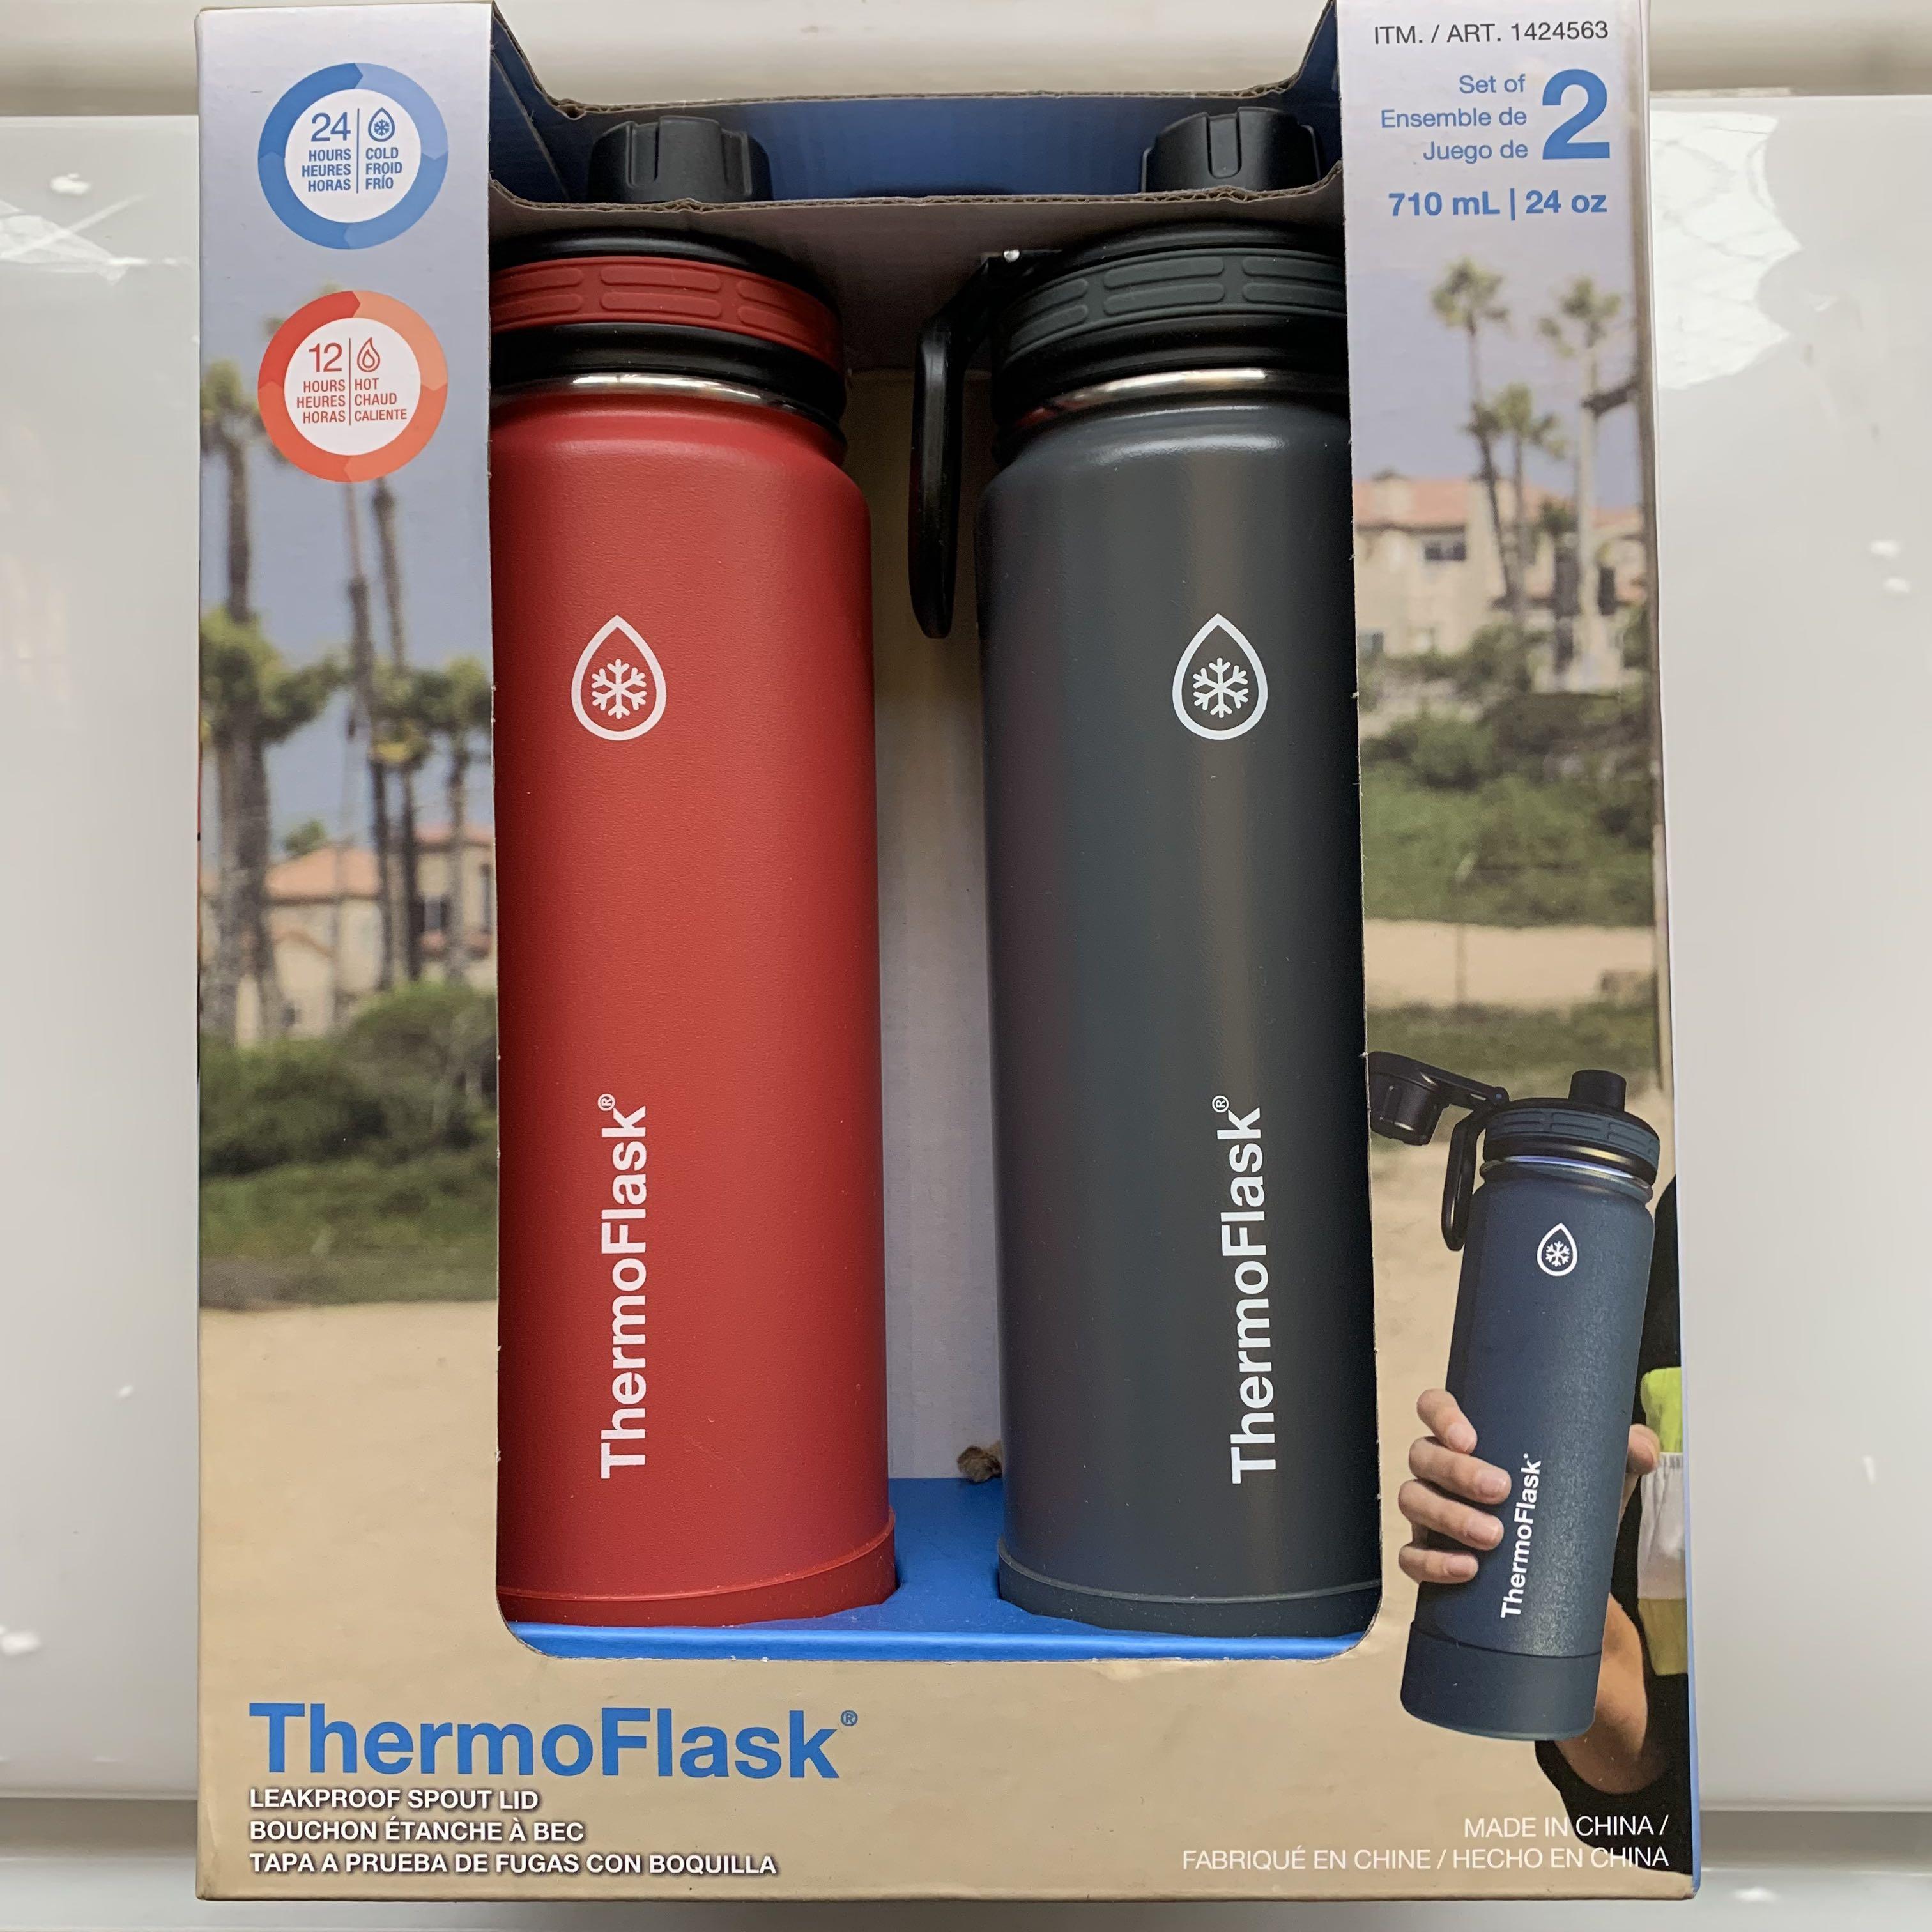 TEAL/BLACK ThermoFlask Leakproof Spout Lid 24oz 2packs 